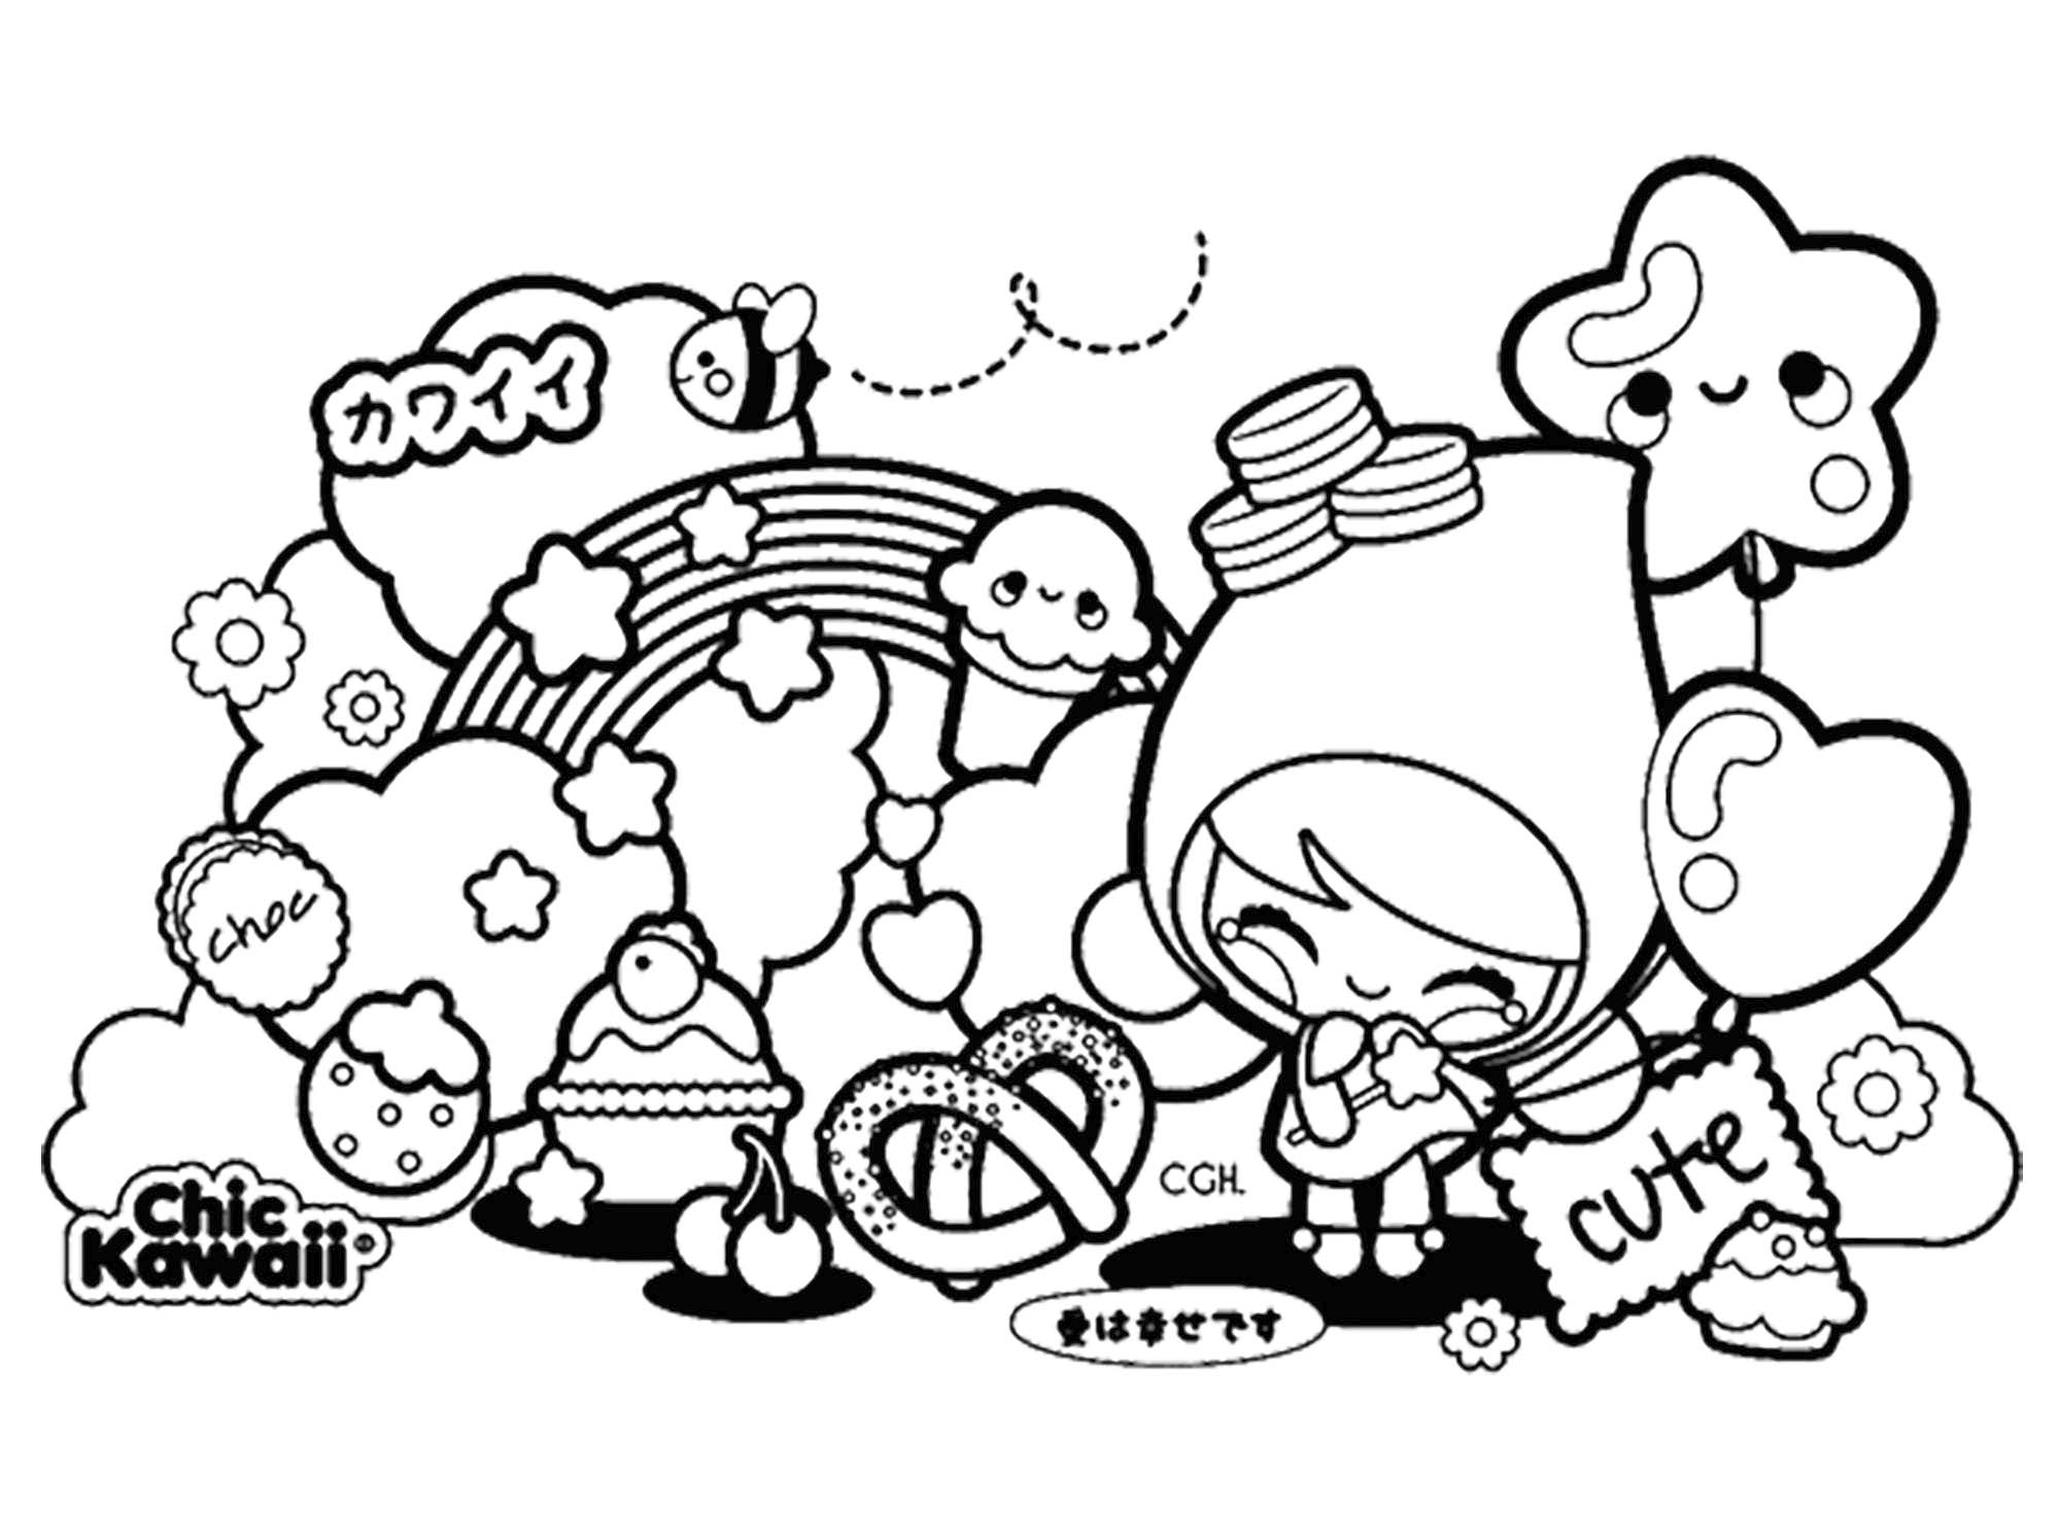 Kawaii Food Coloring Page Coloring In Pages Online